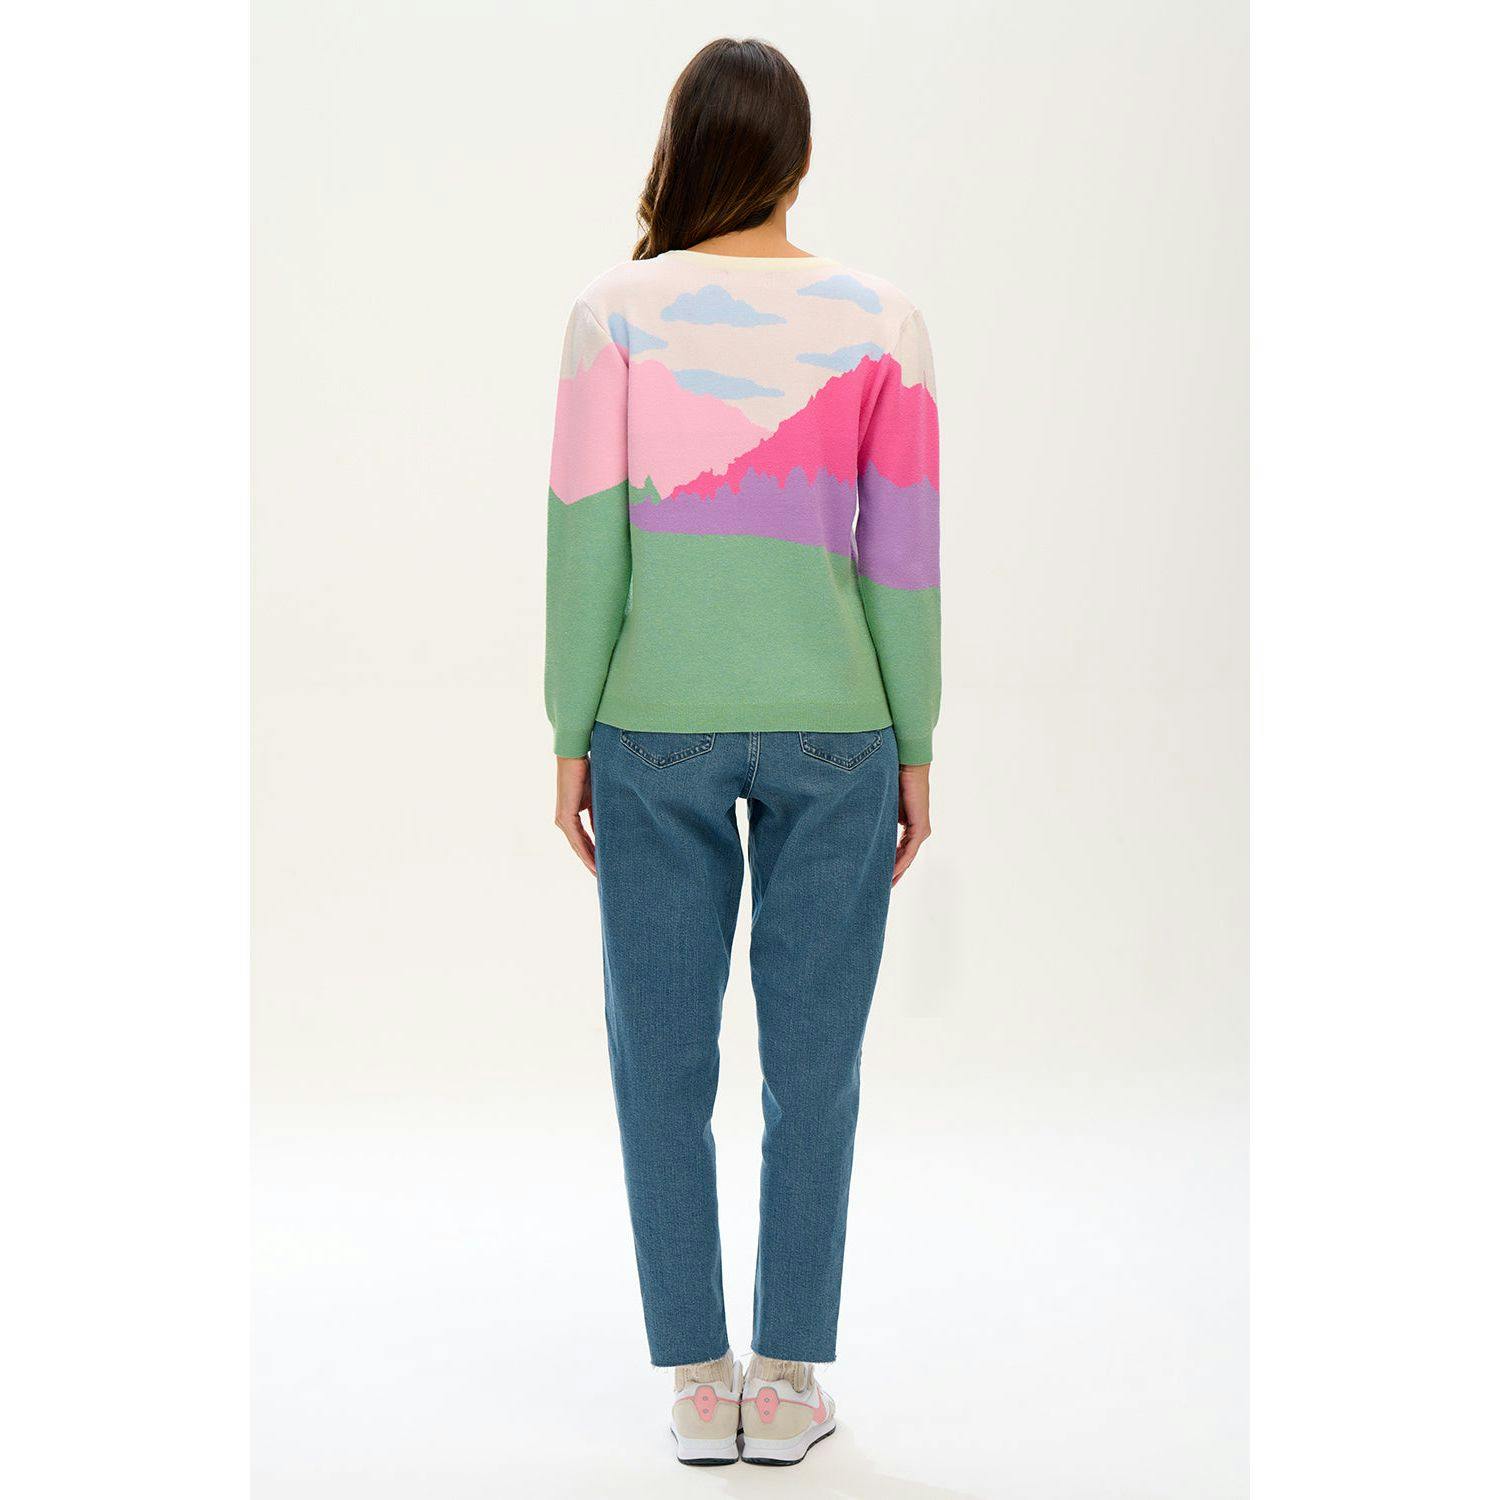 https://res.cloudinary.com/wolfandbadger/image/upload/c_pad,h_1500,w_1500/products/janie-jumper-multi-pastel-valley-scene__eb32864c8743838f1b8a76803fae5c12